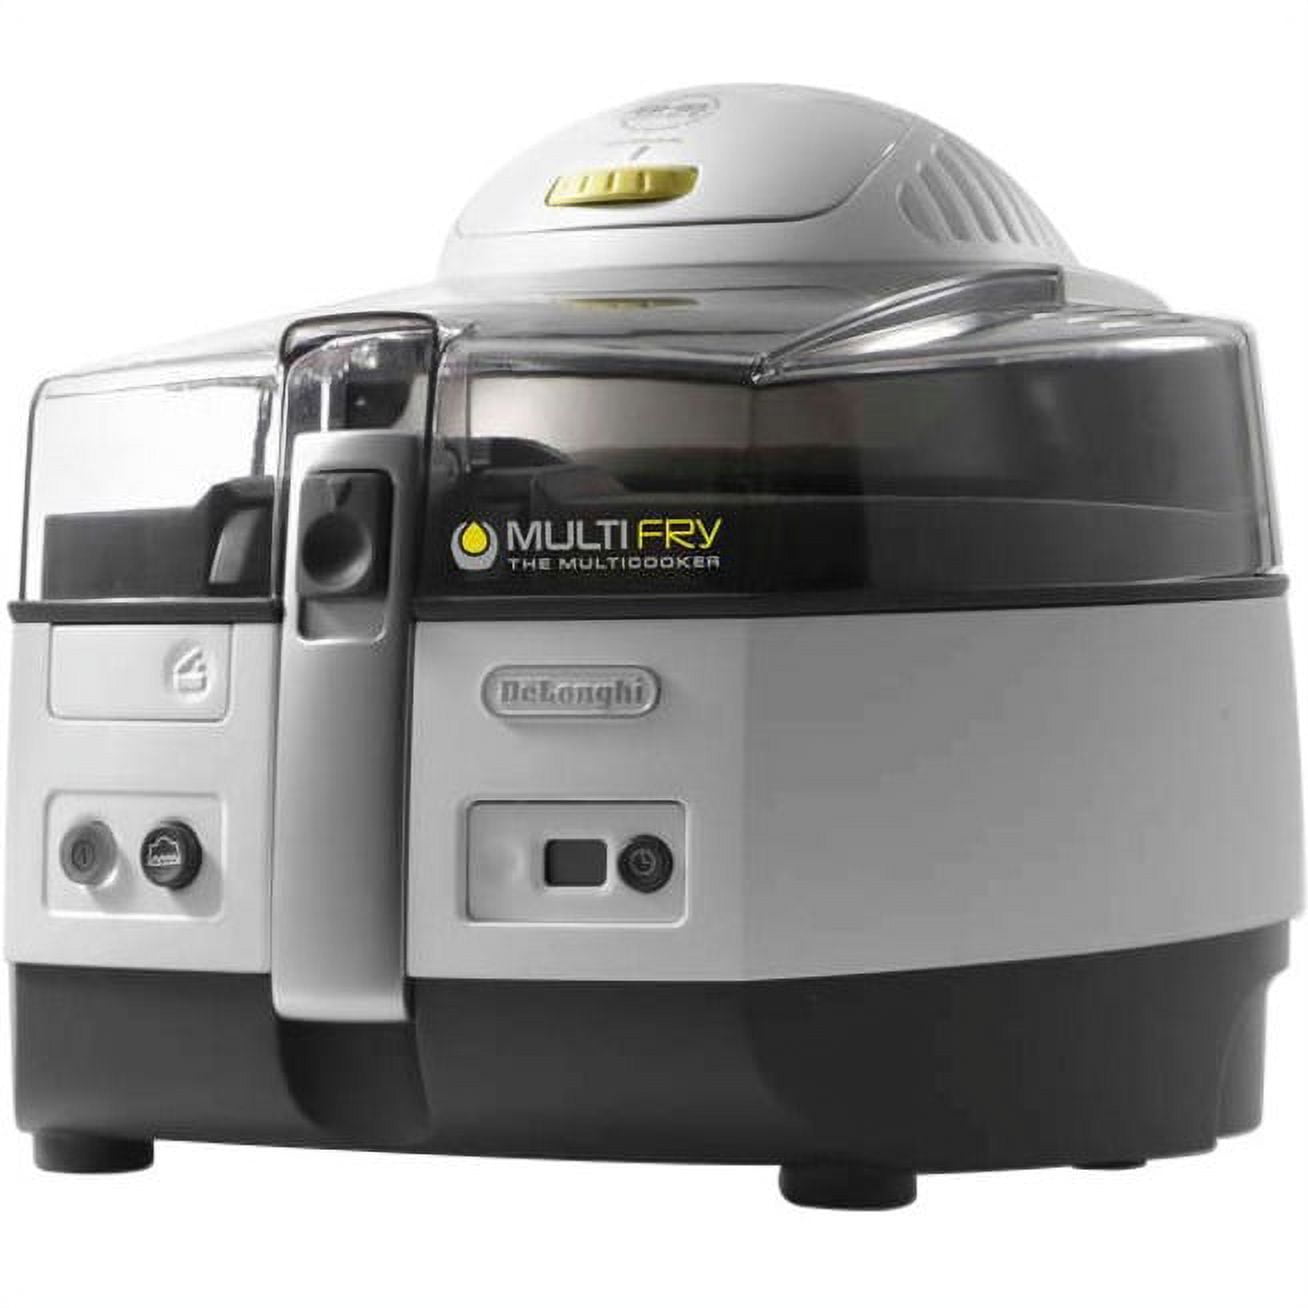  De'Longhi FH1363 MultiFry Extra, air fryer and Multi